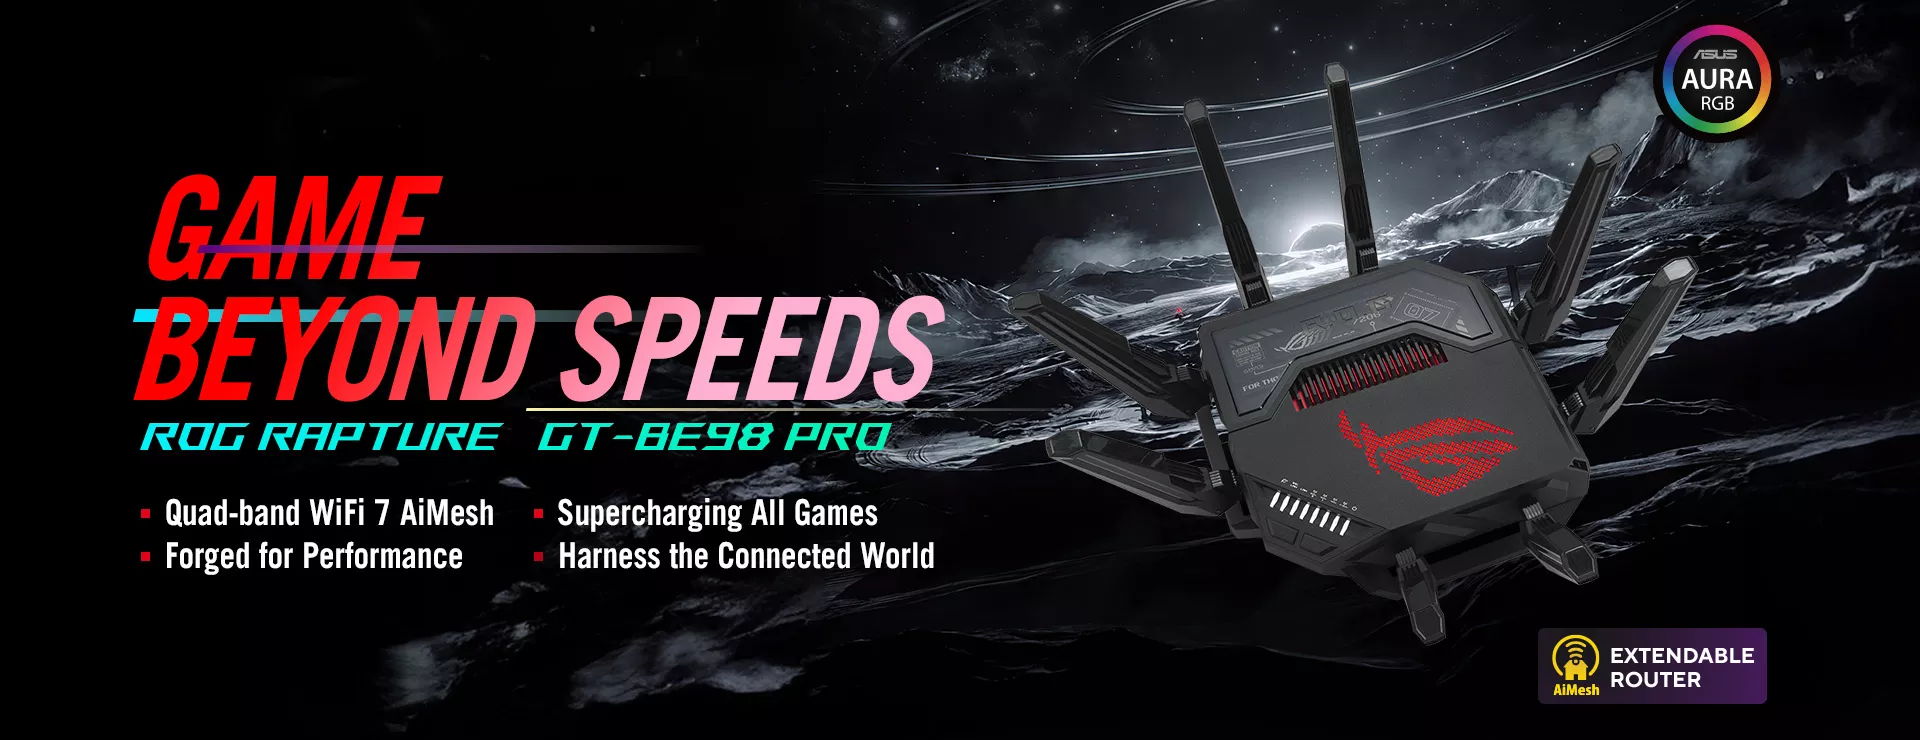 ASUS ROG Rapture GT-BE98 PRO First Quad-Band WiFi 7 Gaming Router